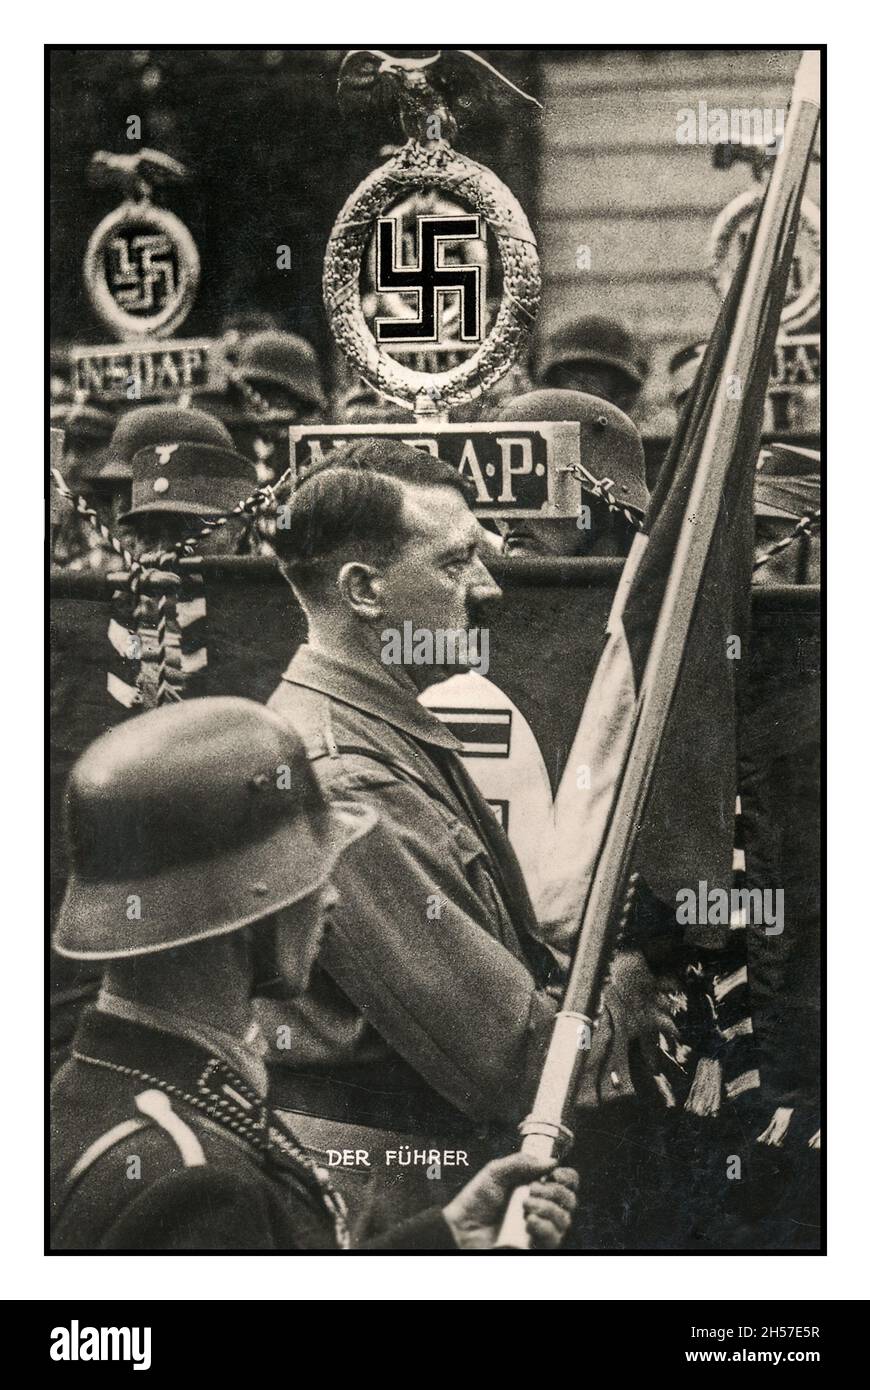 1930s Propaganda Poster card of Adolf Hitler titled 'Der Fuhrer' at an NSDAP Rally in Germany with ceremonial banners and flags with the swastika emblem symbol Stock Photo